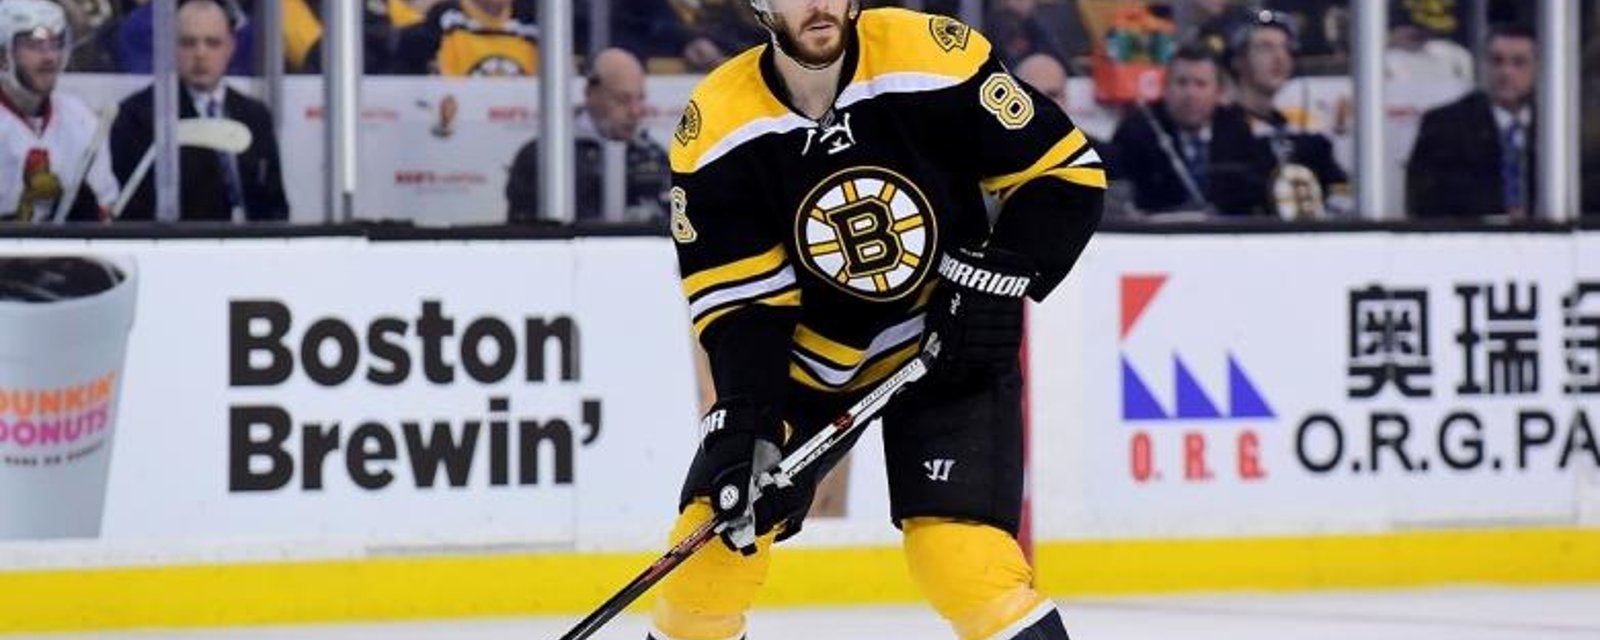 Bruins sign defenseman to new contract and fans are furious!